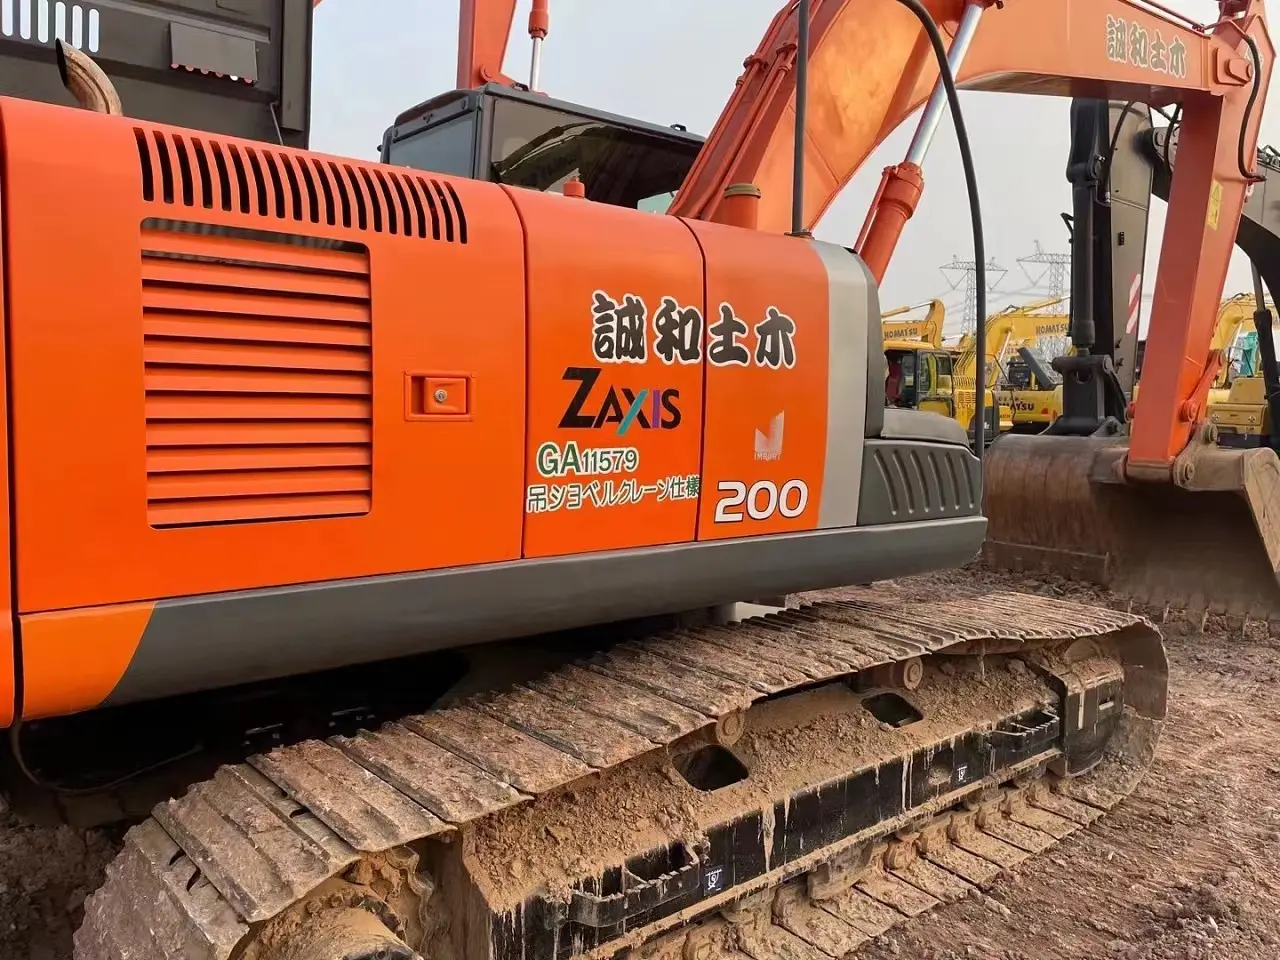 Hitachi 200 Used Excavator Medium Excavator Buy and Sell Construction Machinery Suitable for Highway Construction